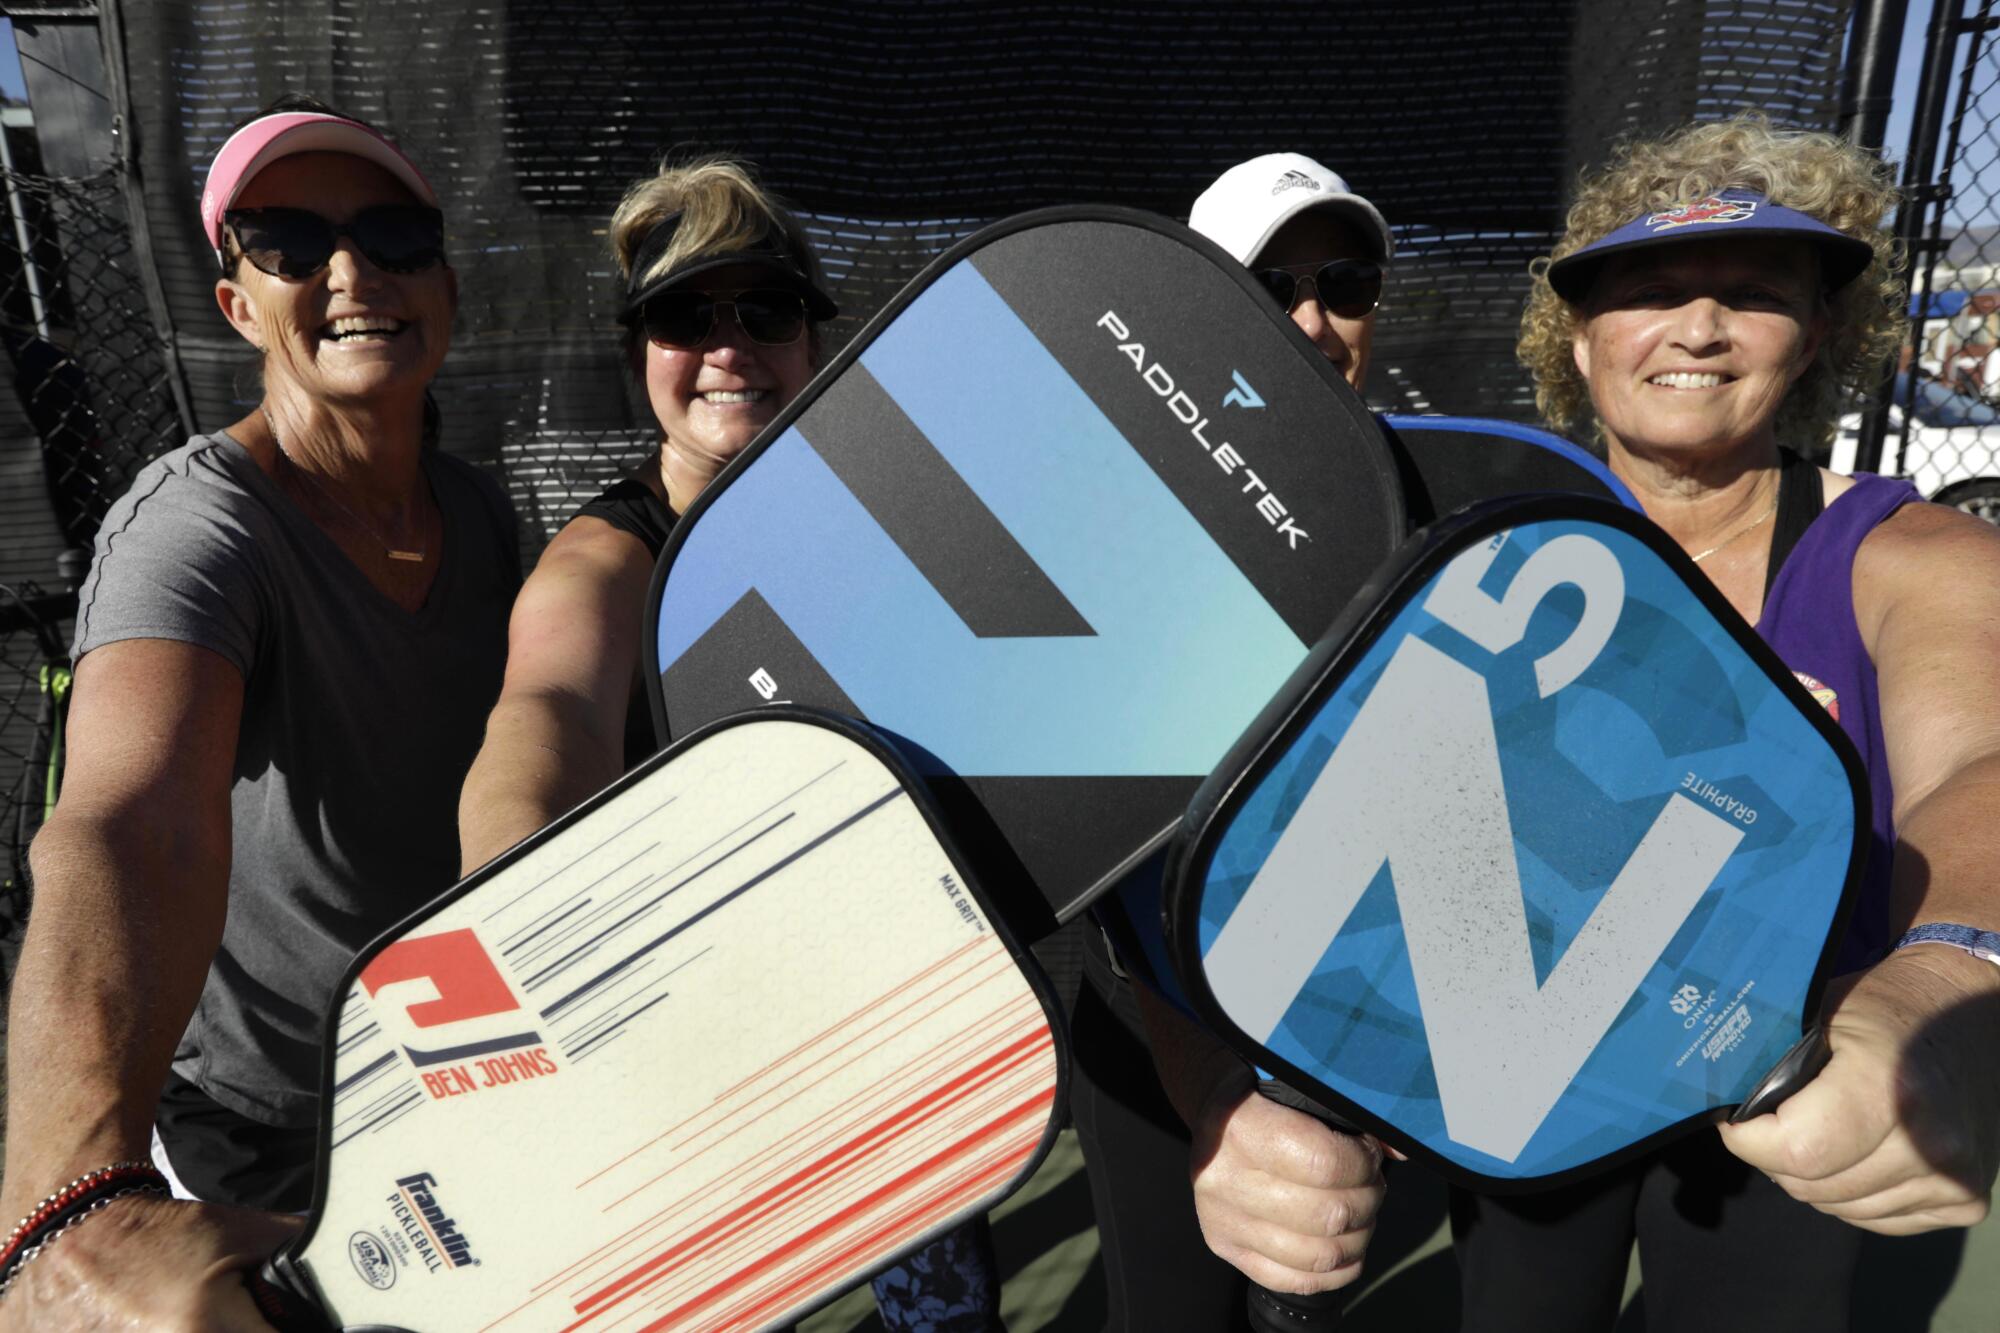 Pickleball players pose for a photo, holding up their paddles